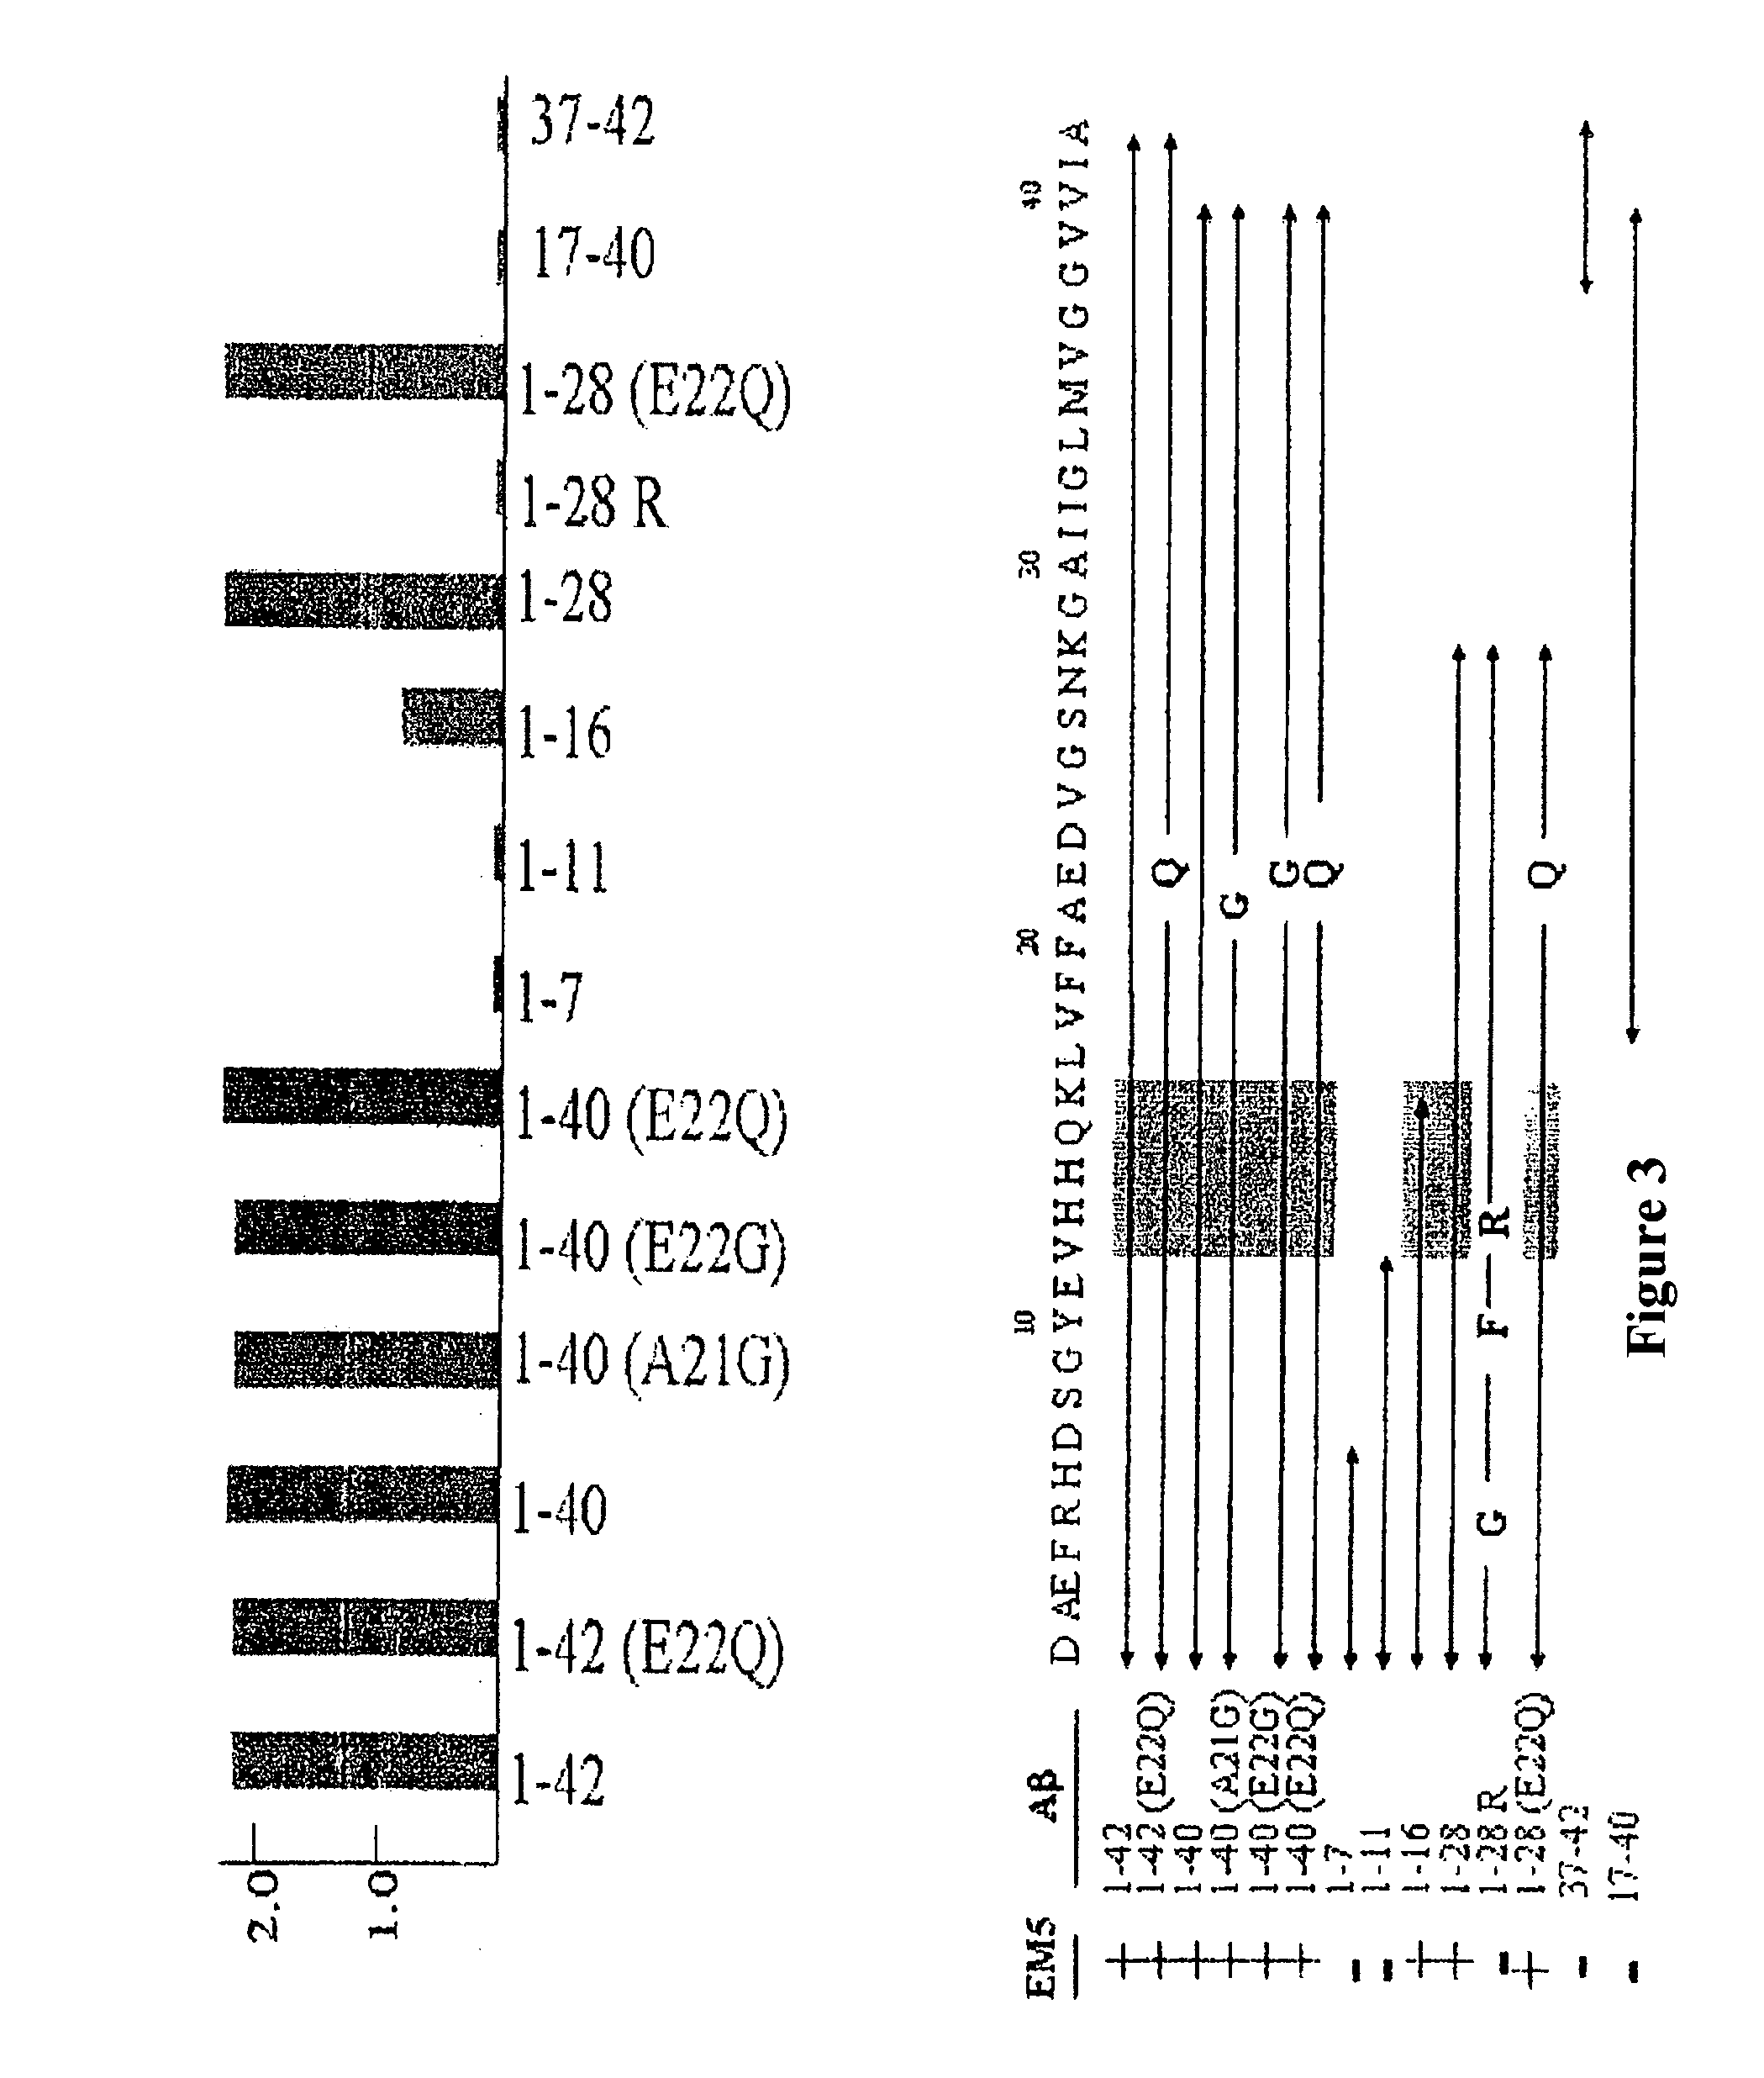 Method for the in vitro diagnosis of alzheimer's disease using a monoclonal antibody